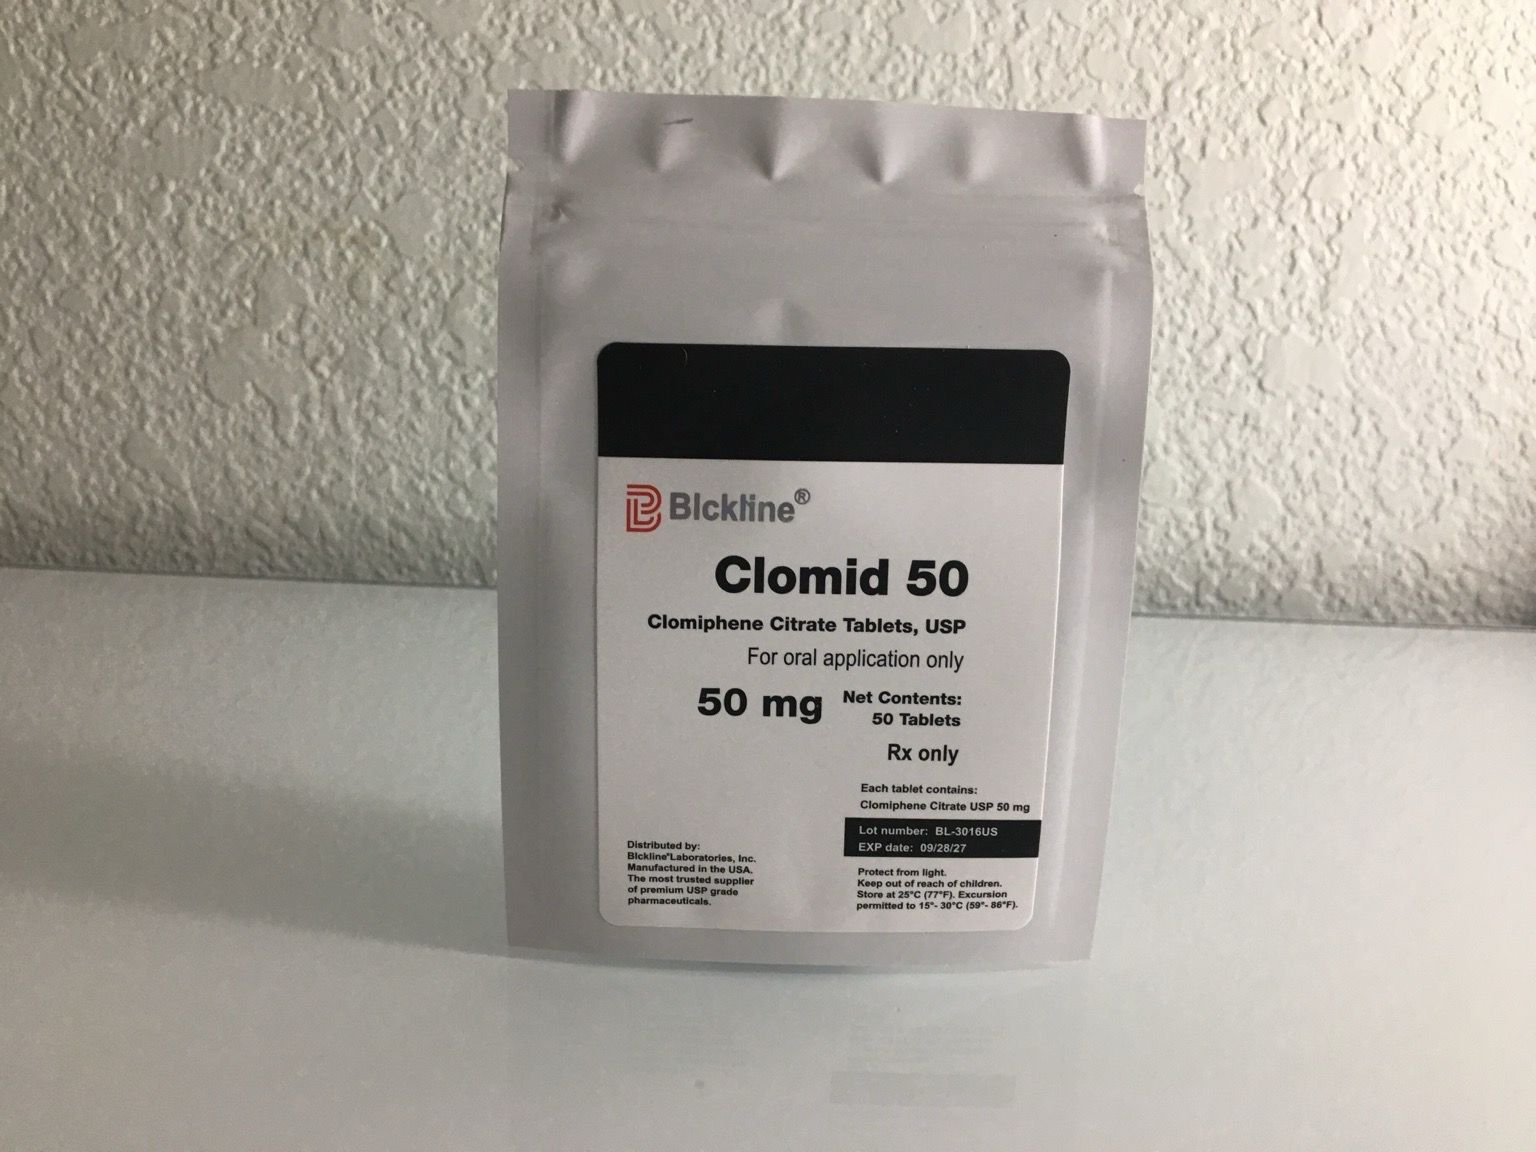 Clomid 50 mg 50 tablets Clomiphene Citrate